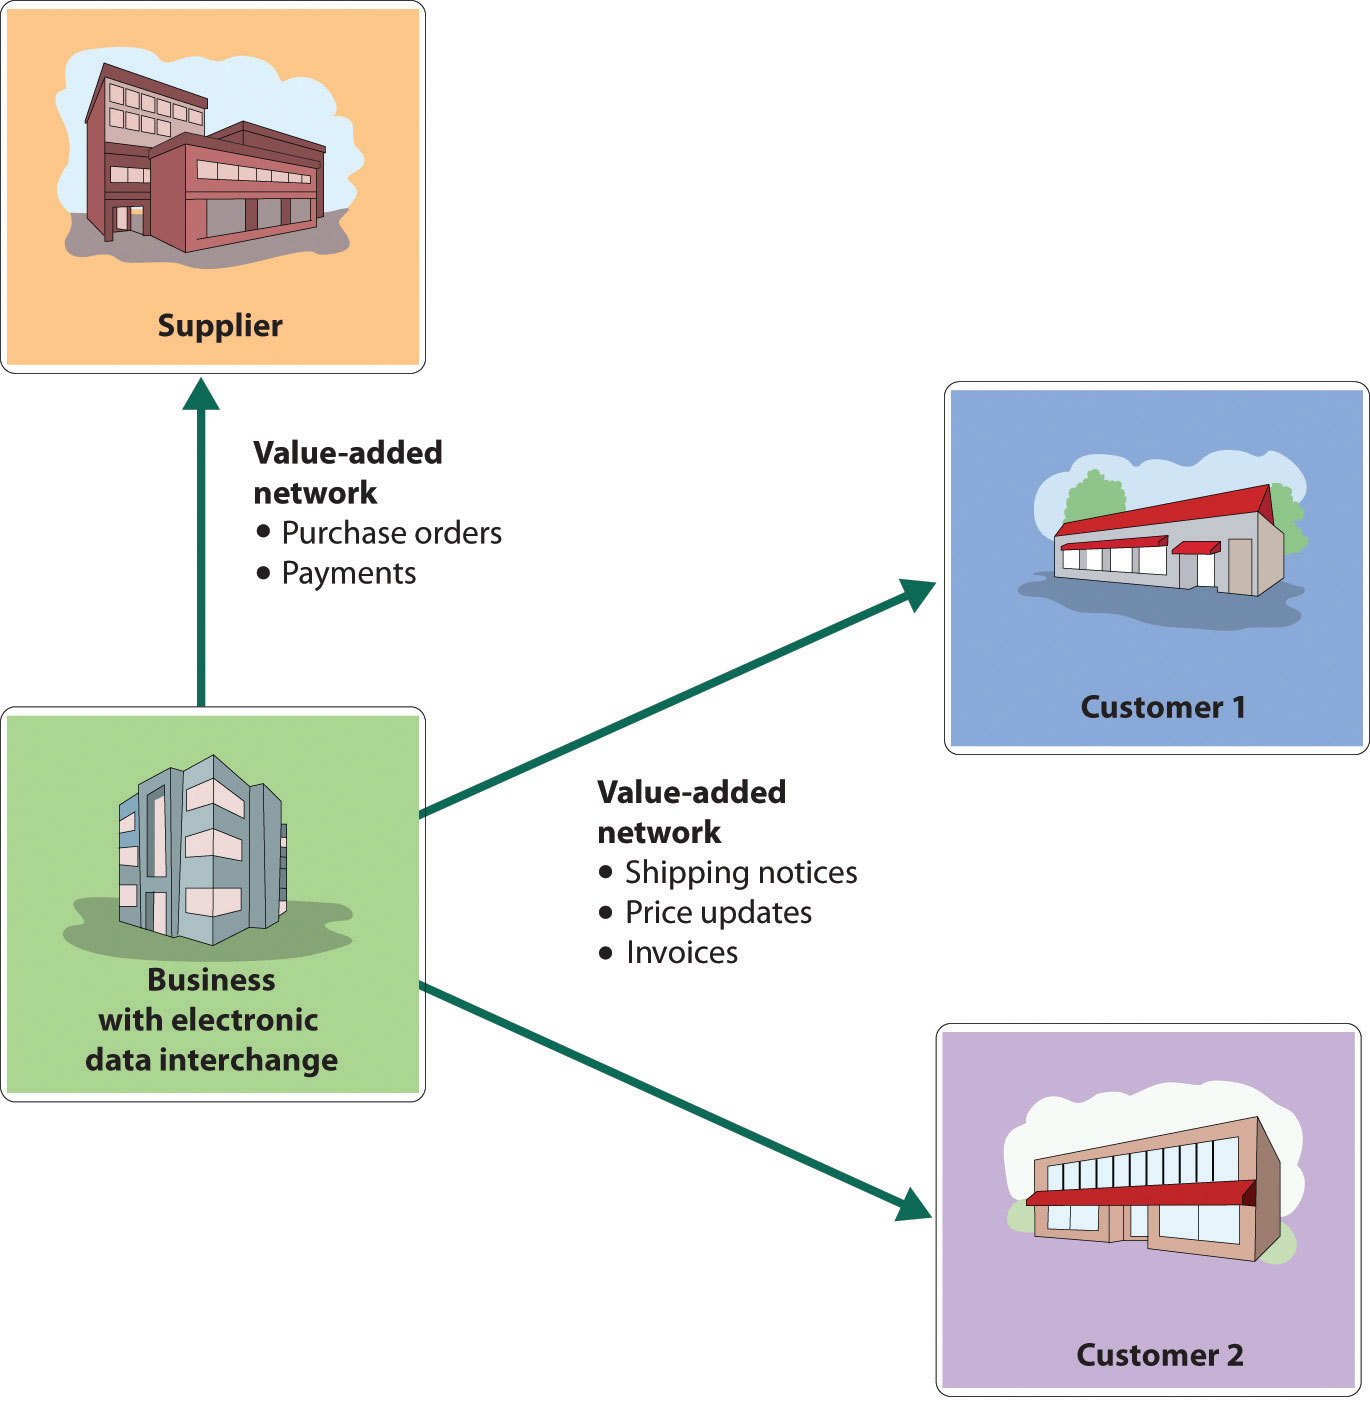 Electronic Data Interchange System and Value-Added Networks. From the bottom left; Business with electronic data interchange goes to Supplier. The value-added network includes purchase orders and payments. The business also moves to Customer 1 and 2, with a value-added network including shipping notices, price updates, and invoices.